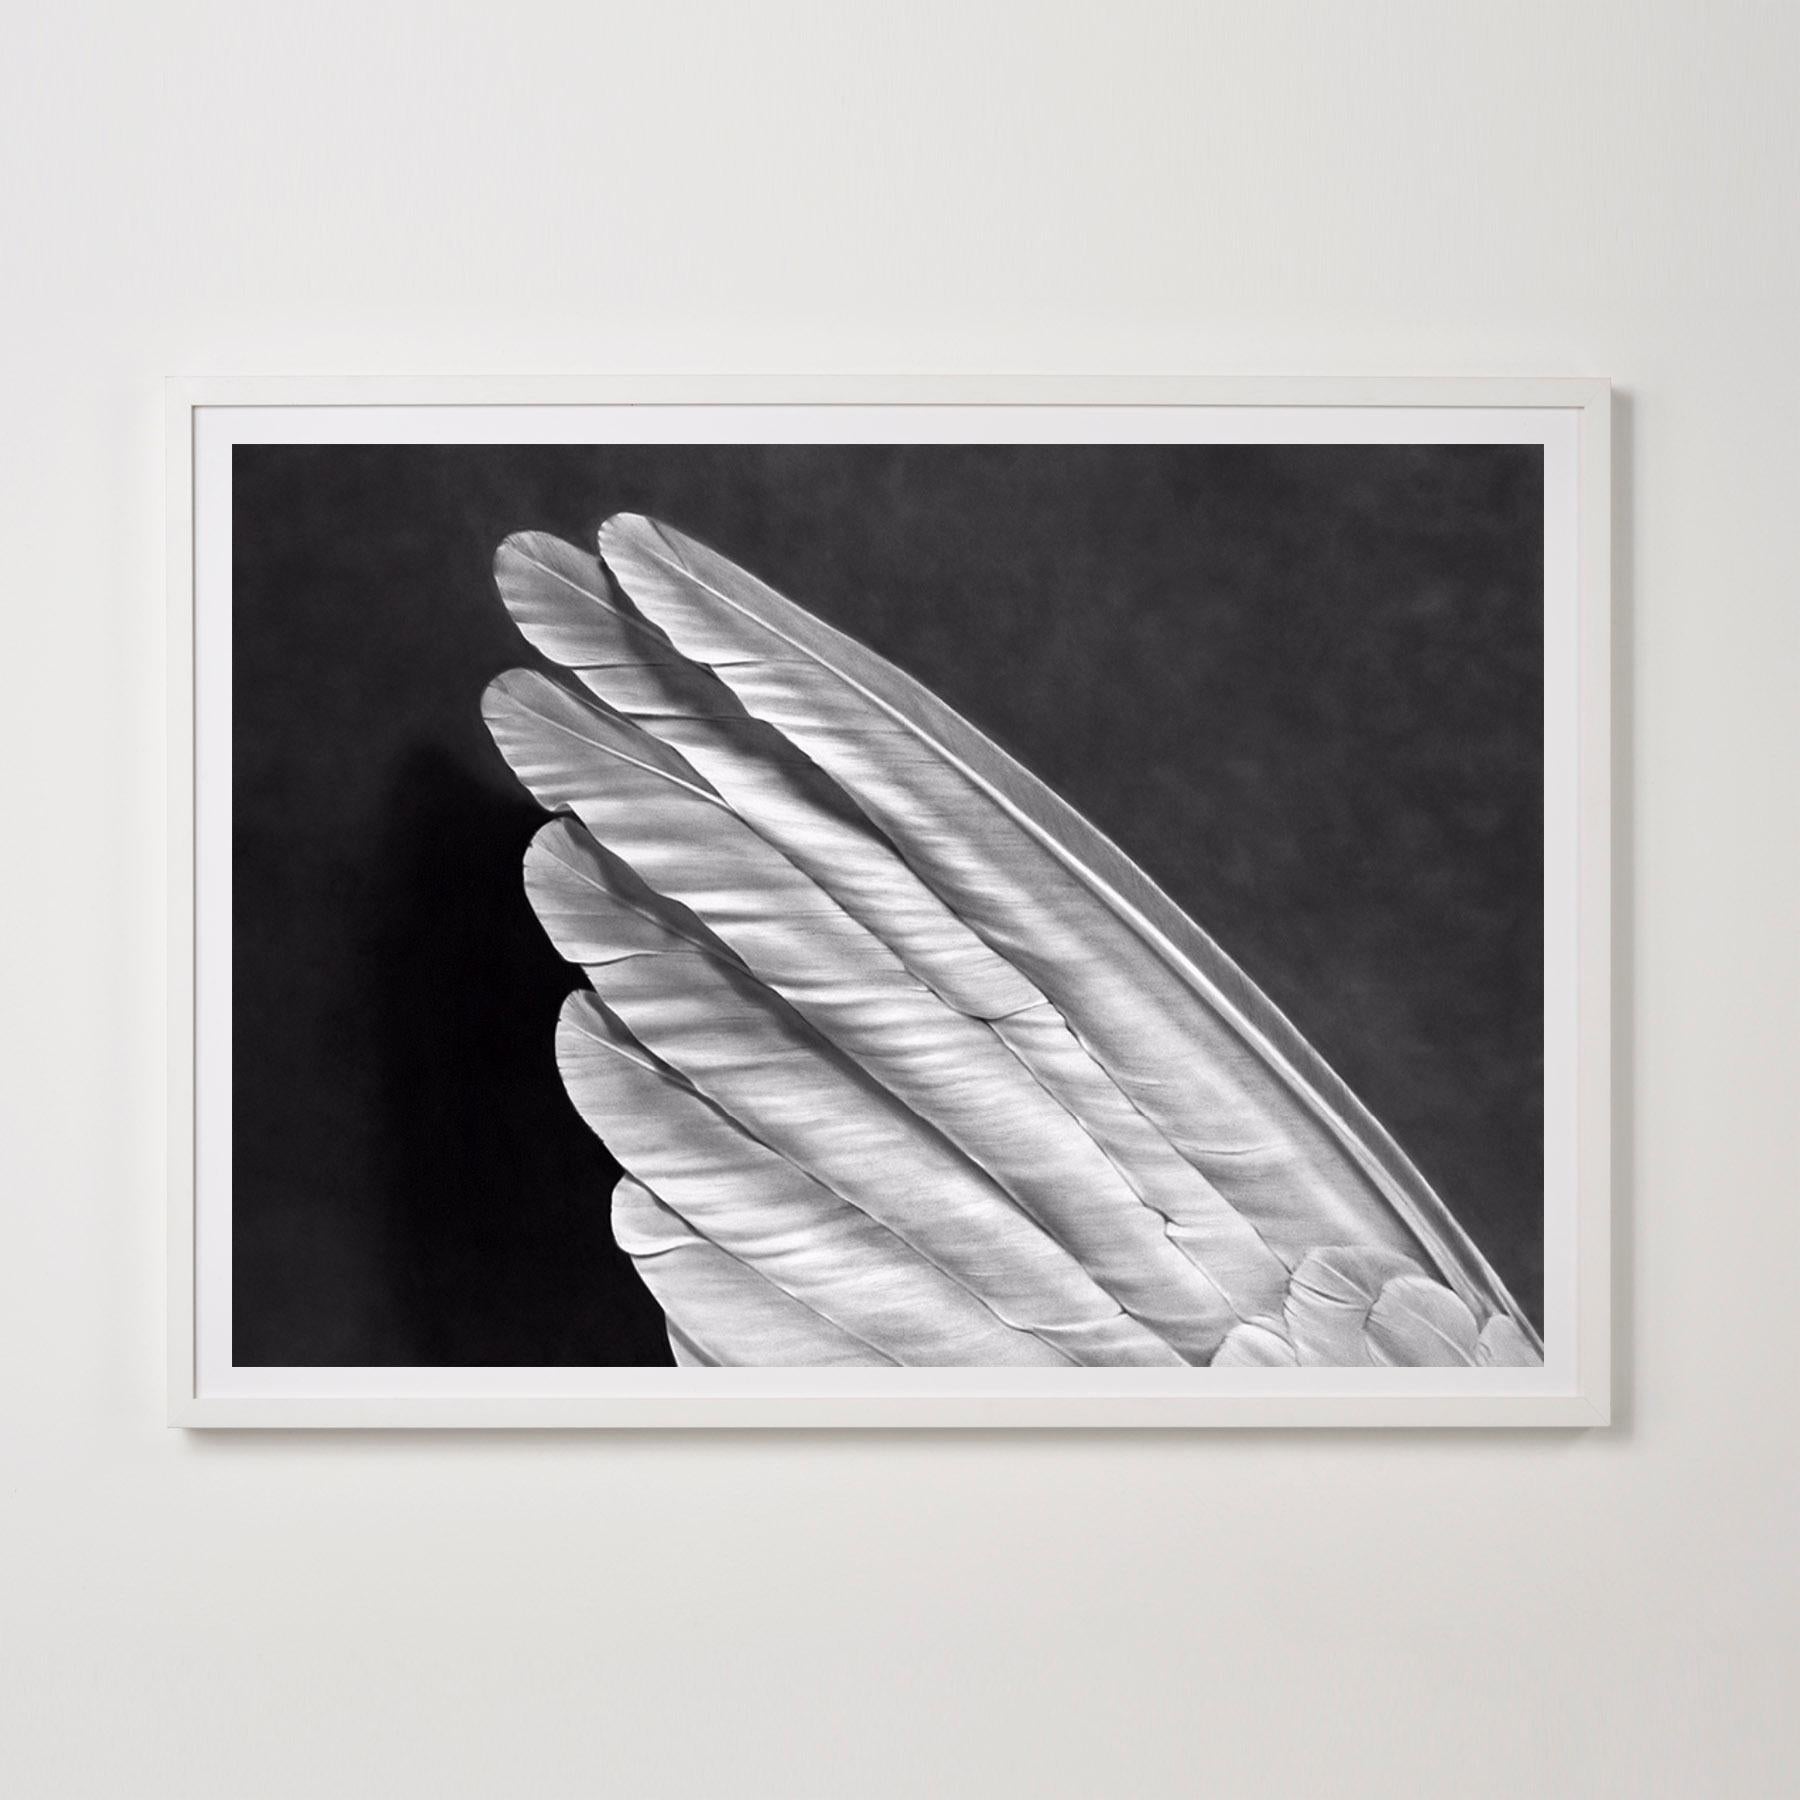 Angel's Wing (Small Version)- Contemporary, 21st Century, , Limited Edition - Print by Robert Longo